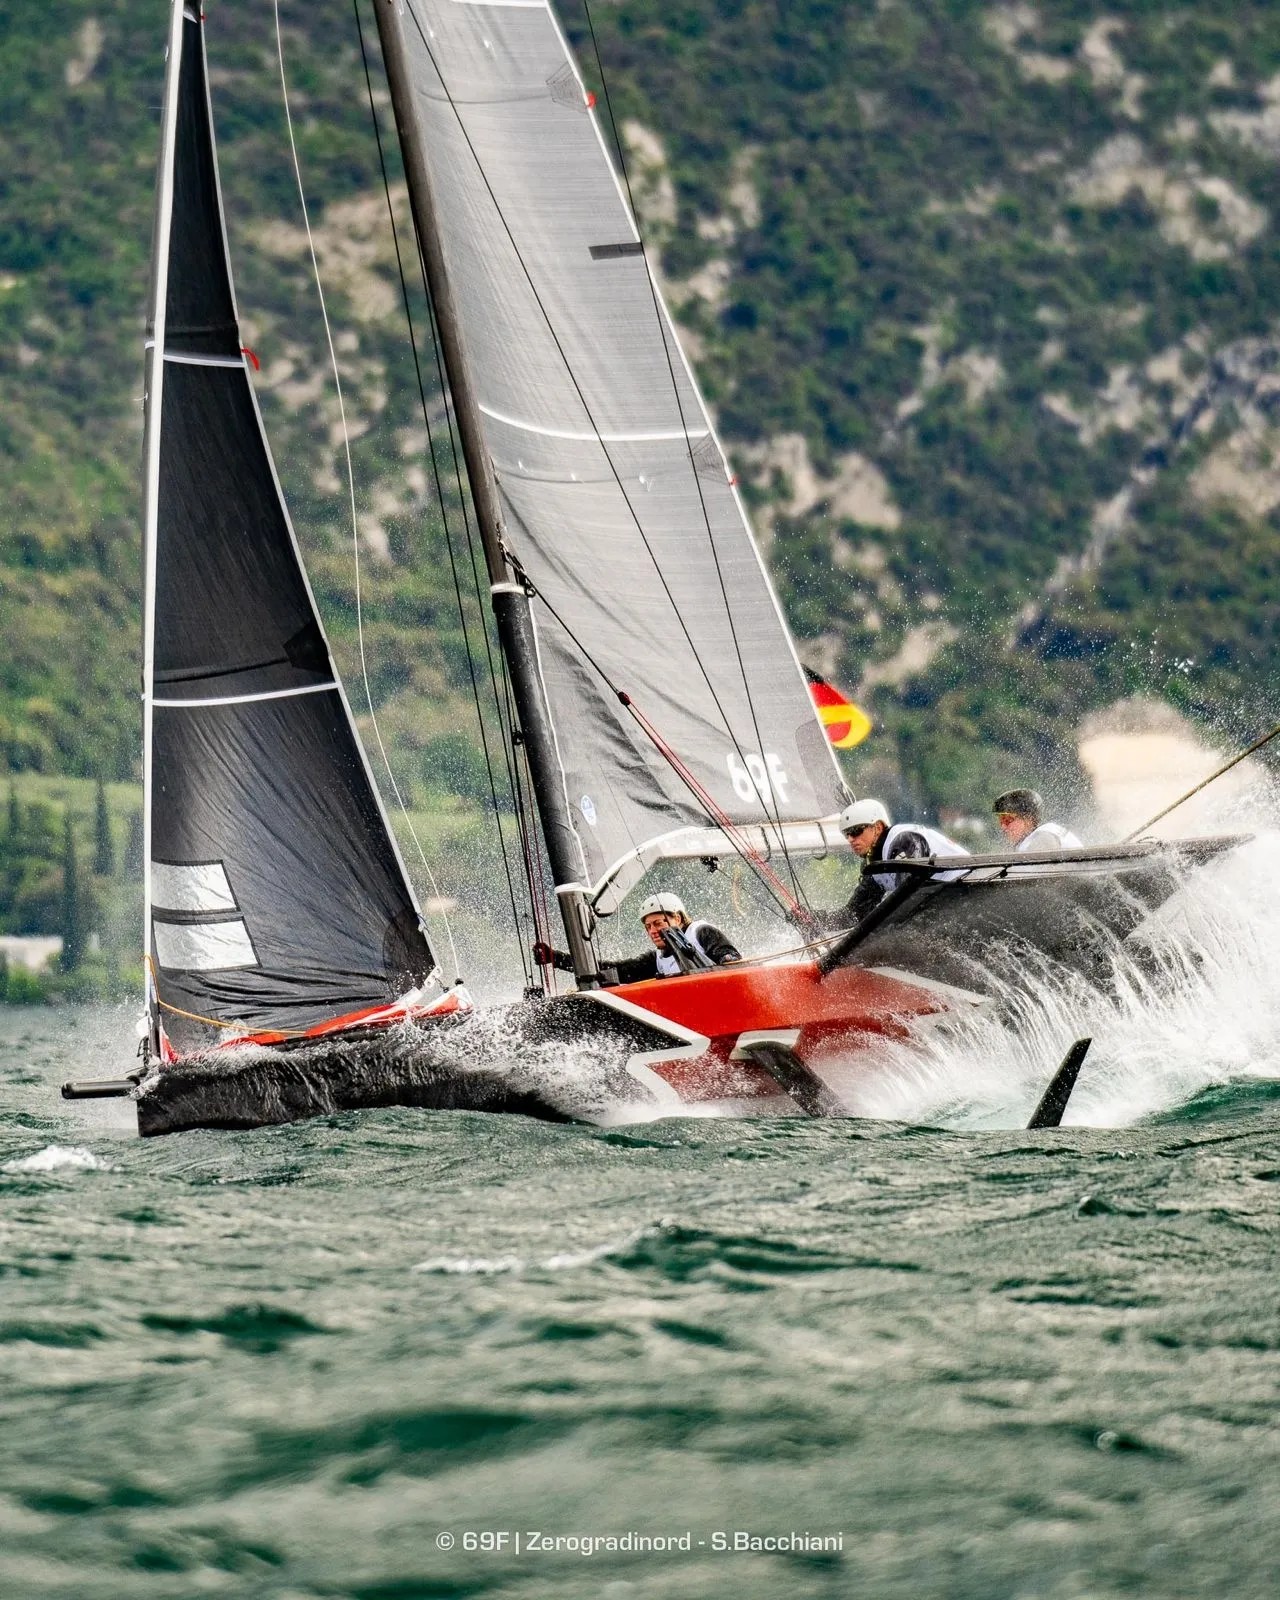  Persico 69F - Youth Gold Cup - Torbole ITA - Day 4